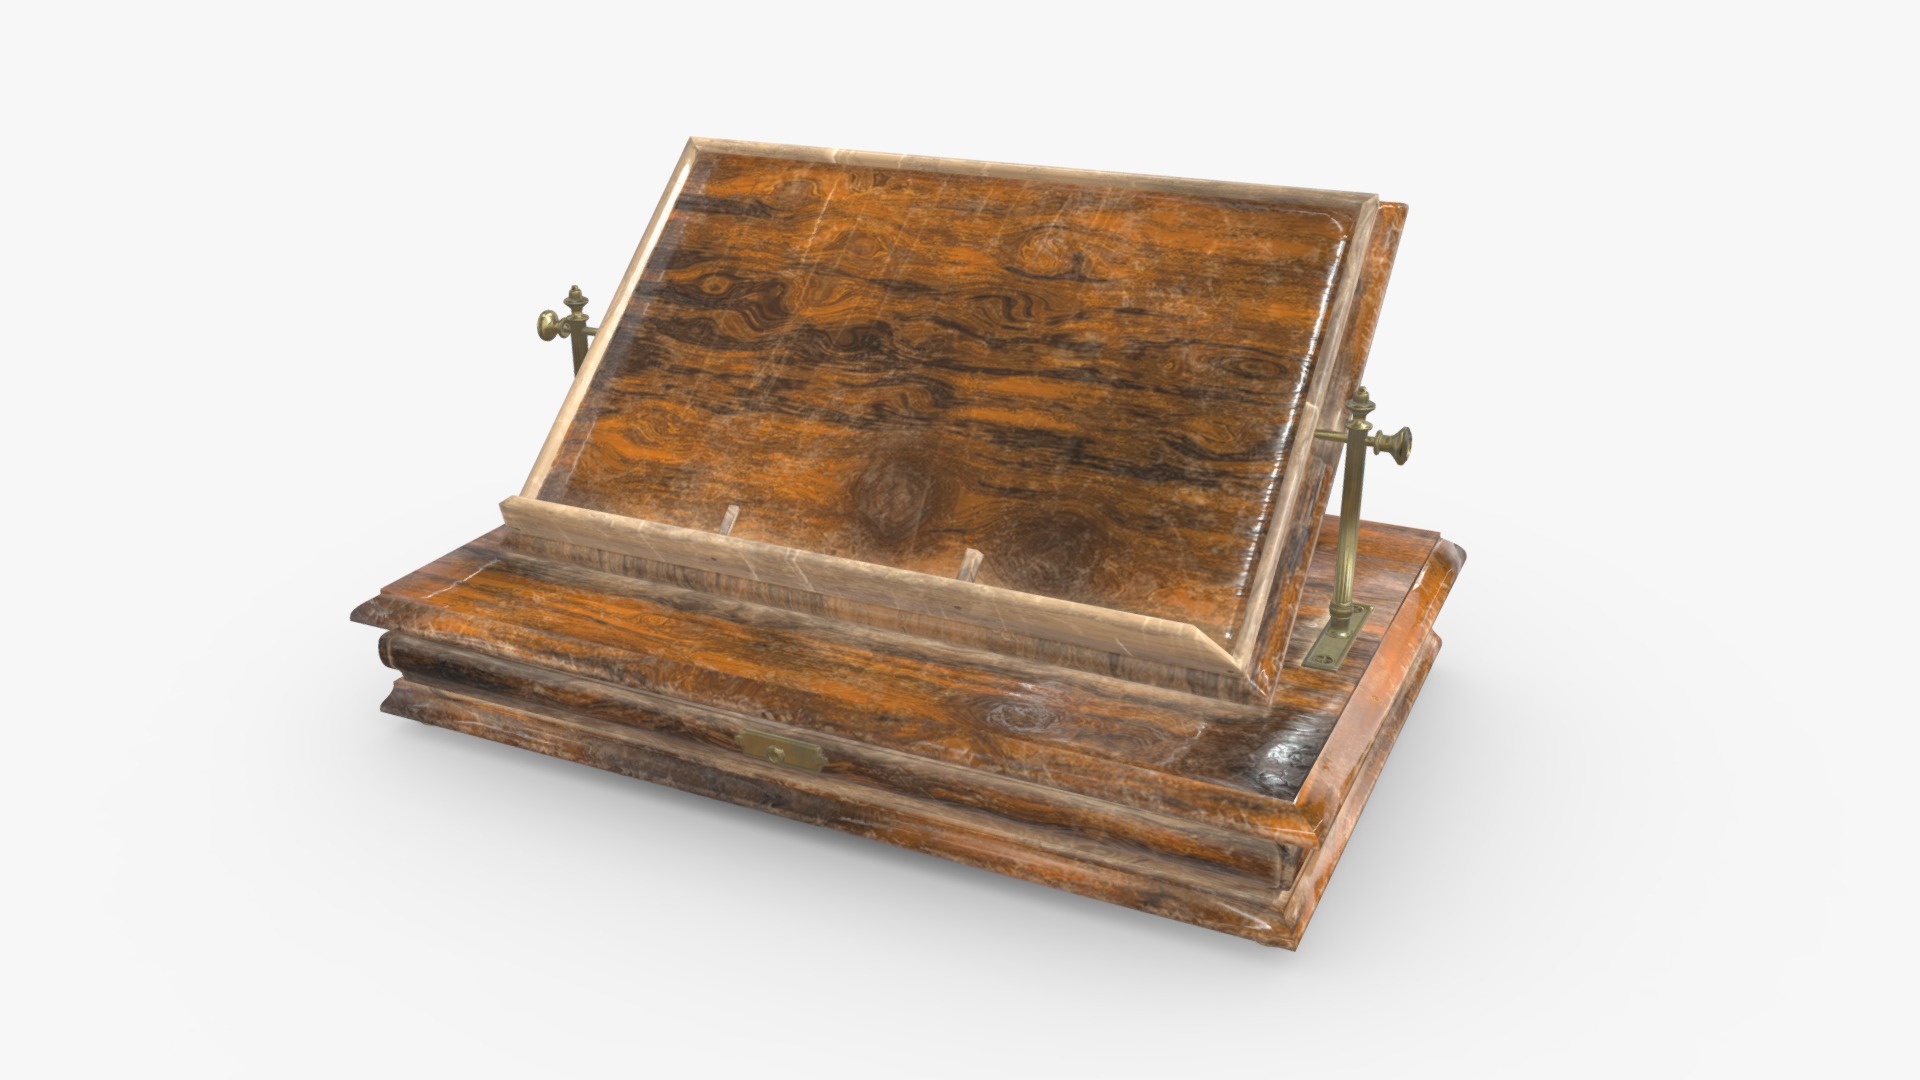 3D model Old Bookrest - This is a 3D model of the Old Bookrest. The 3D model is about a wooden chest with a person standing on top.